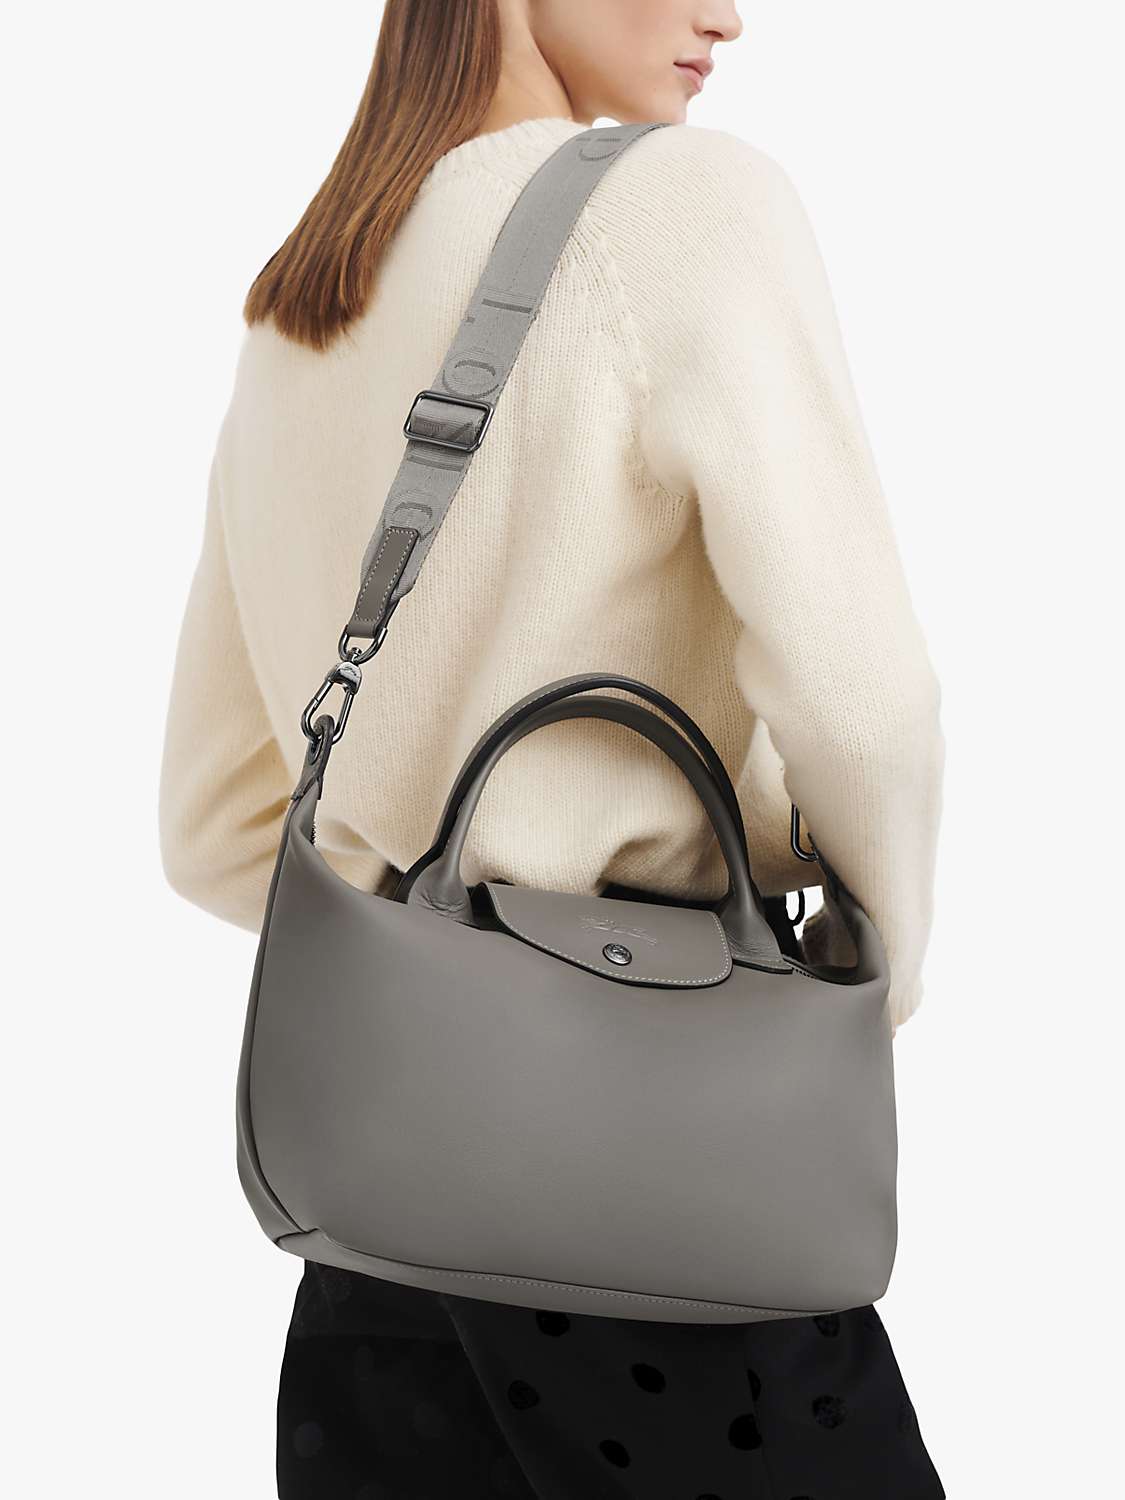 Buy Longchamp Le Pliage Xtra Small Leather Top Handle Bag Online at johnlewis.com